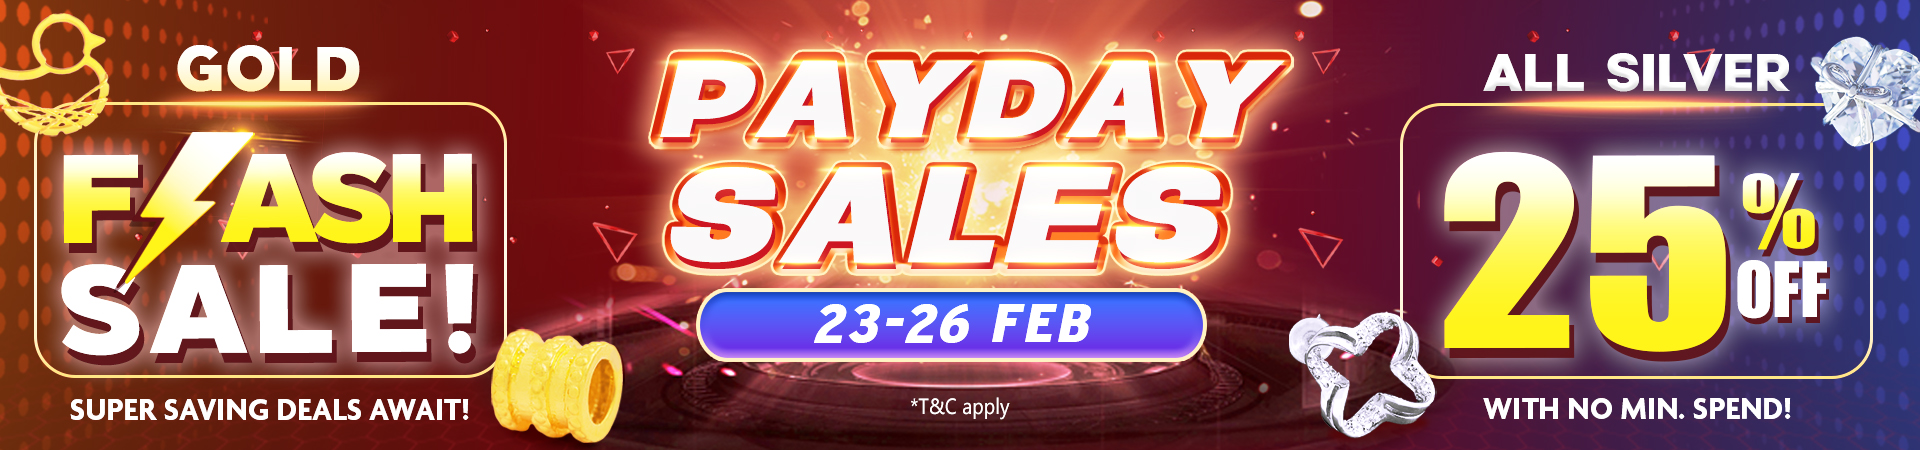 Payday sales Banner